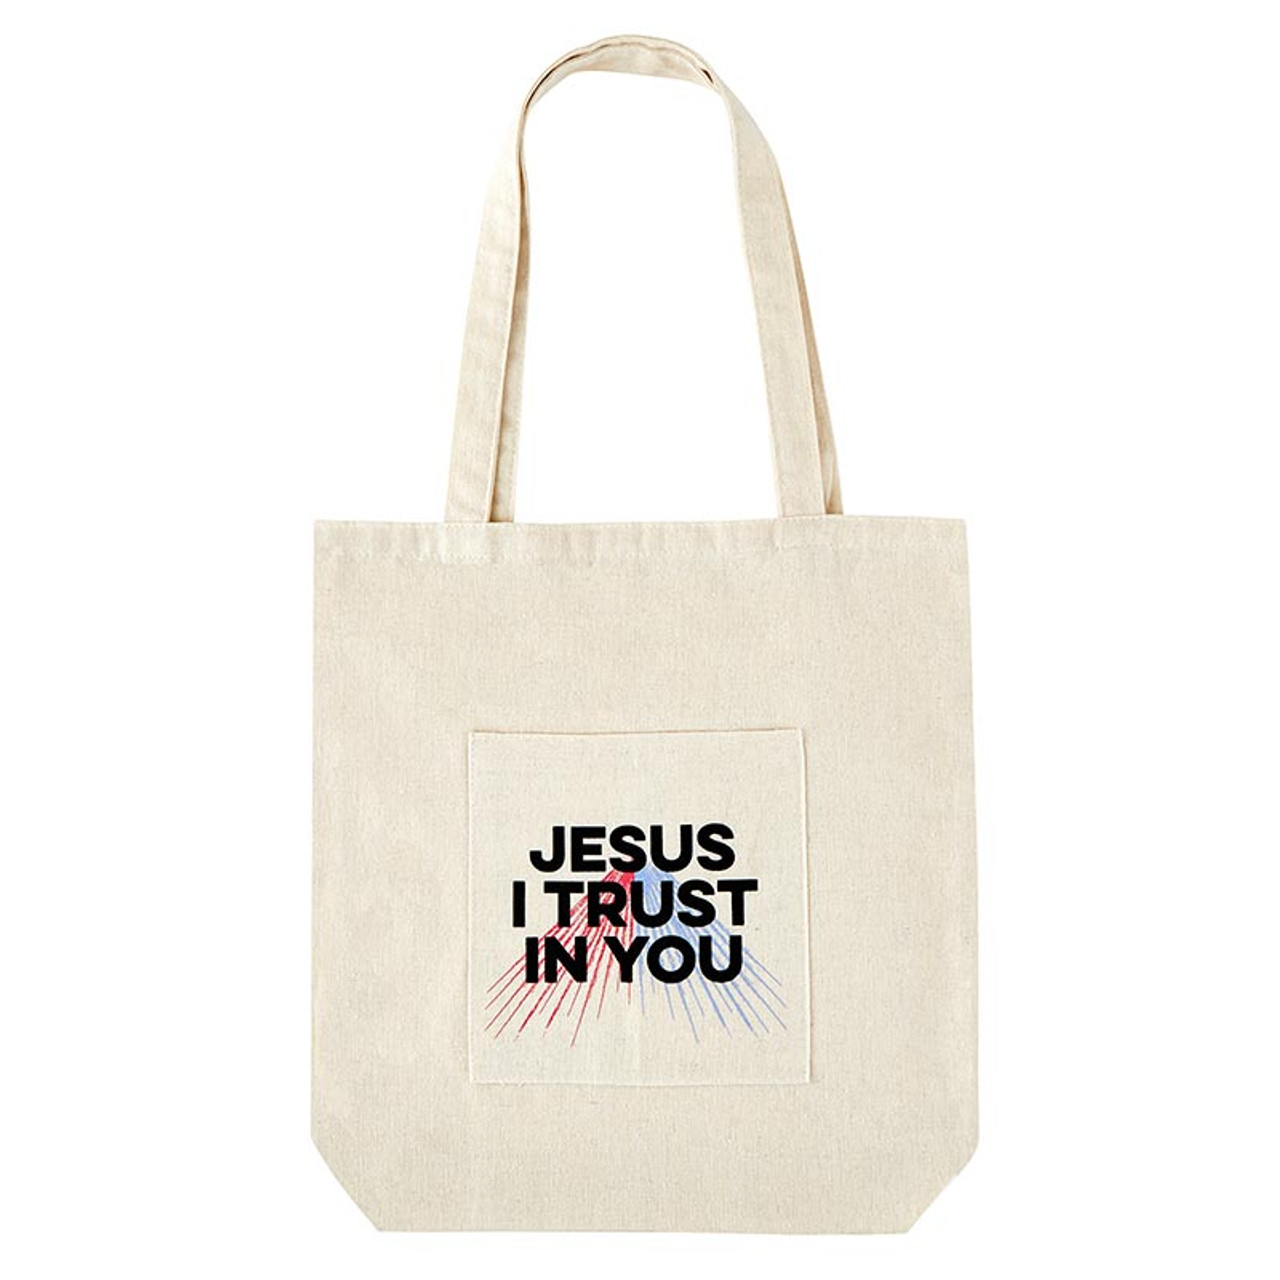 Jesus I Trust in You Canvas Tote Bag with Pocket - 12/pk - [Consumer]Autom